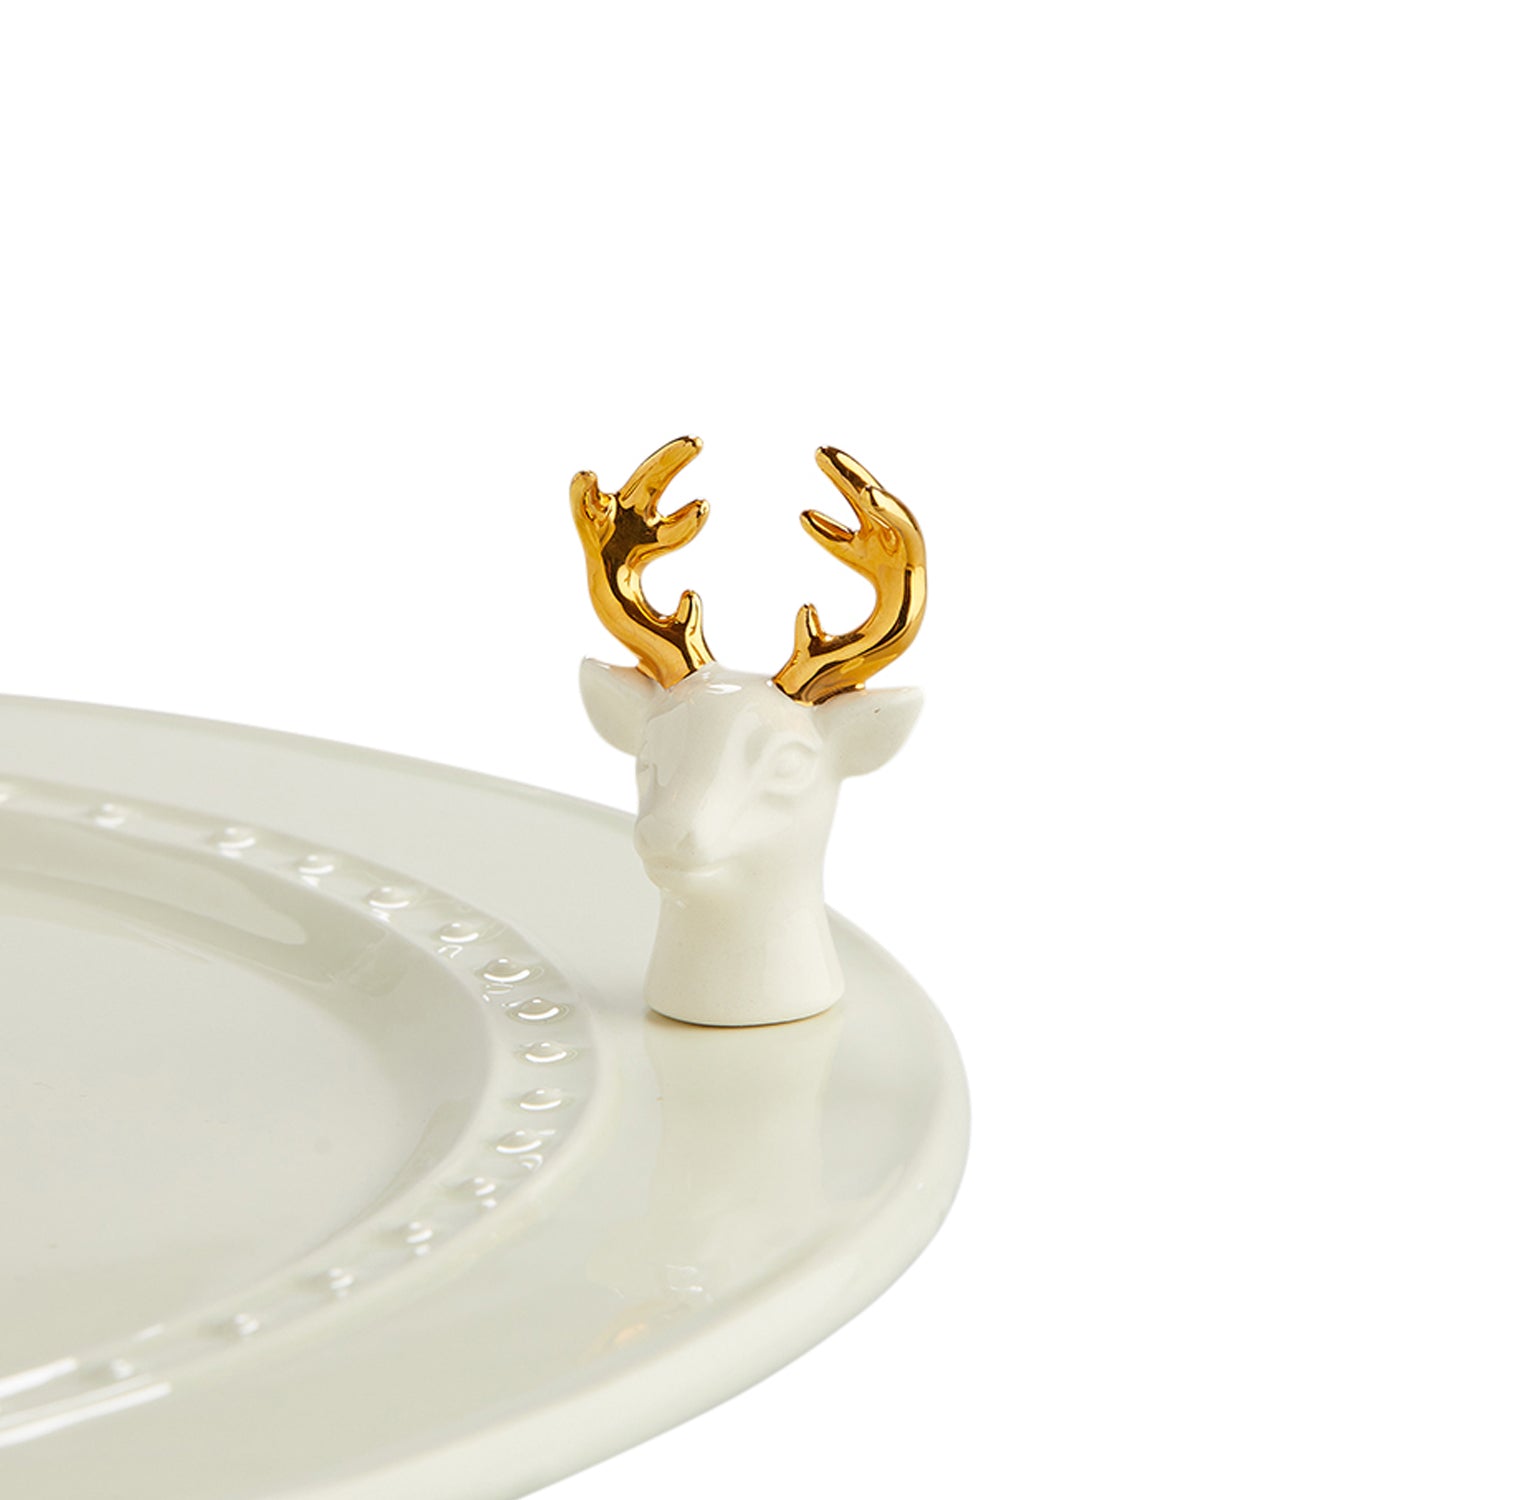 A208 Nora Fleming Oh Deer mini with pearlized white accent and delicate gold antlers. Available at The Painted Cottage in Edgewater, MD.